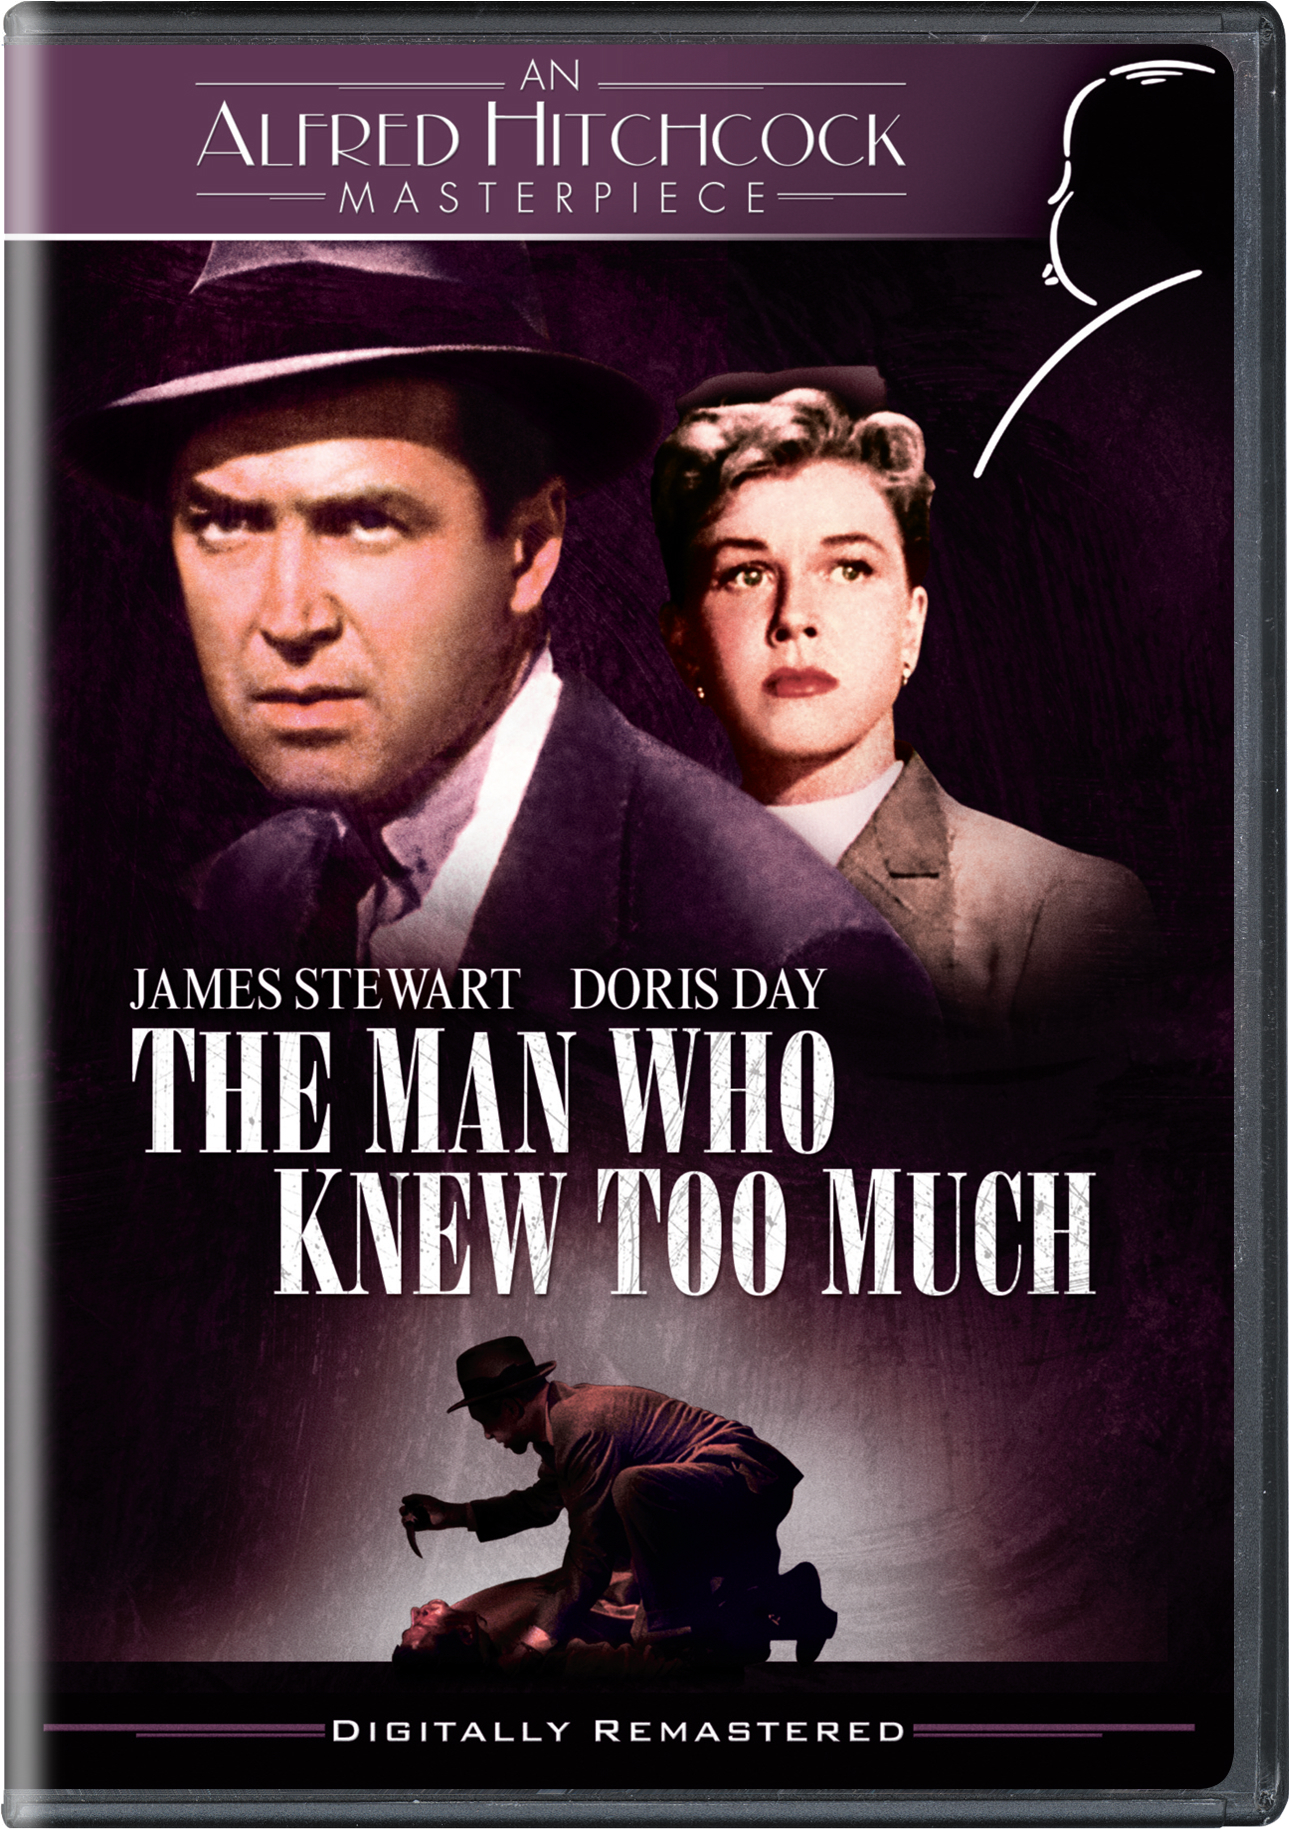 The Man Who Knew Too Much - DVD [ 1956 ]  - Modern Classic Movies On DVD - Movies On GRUV